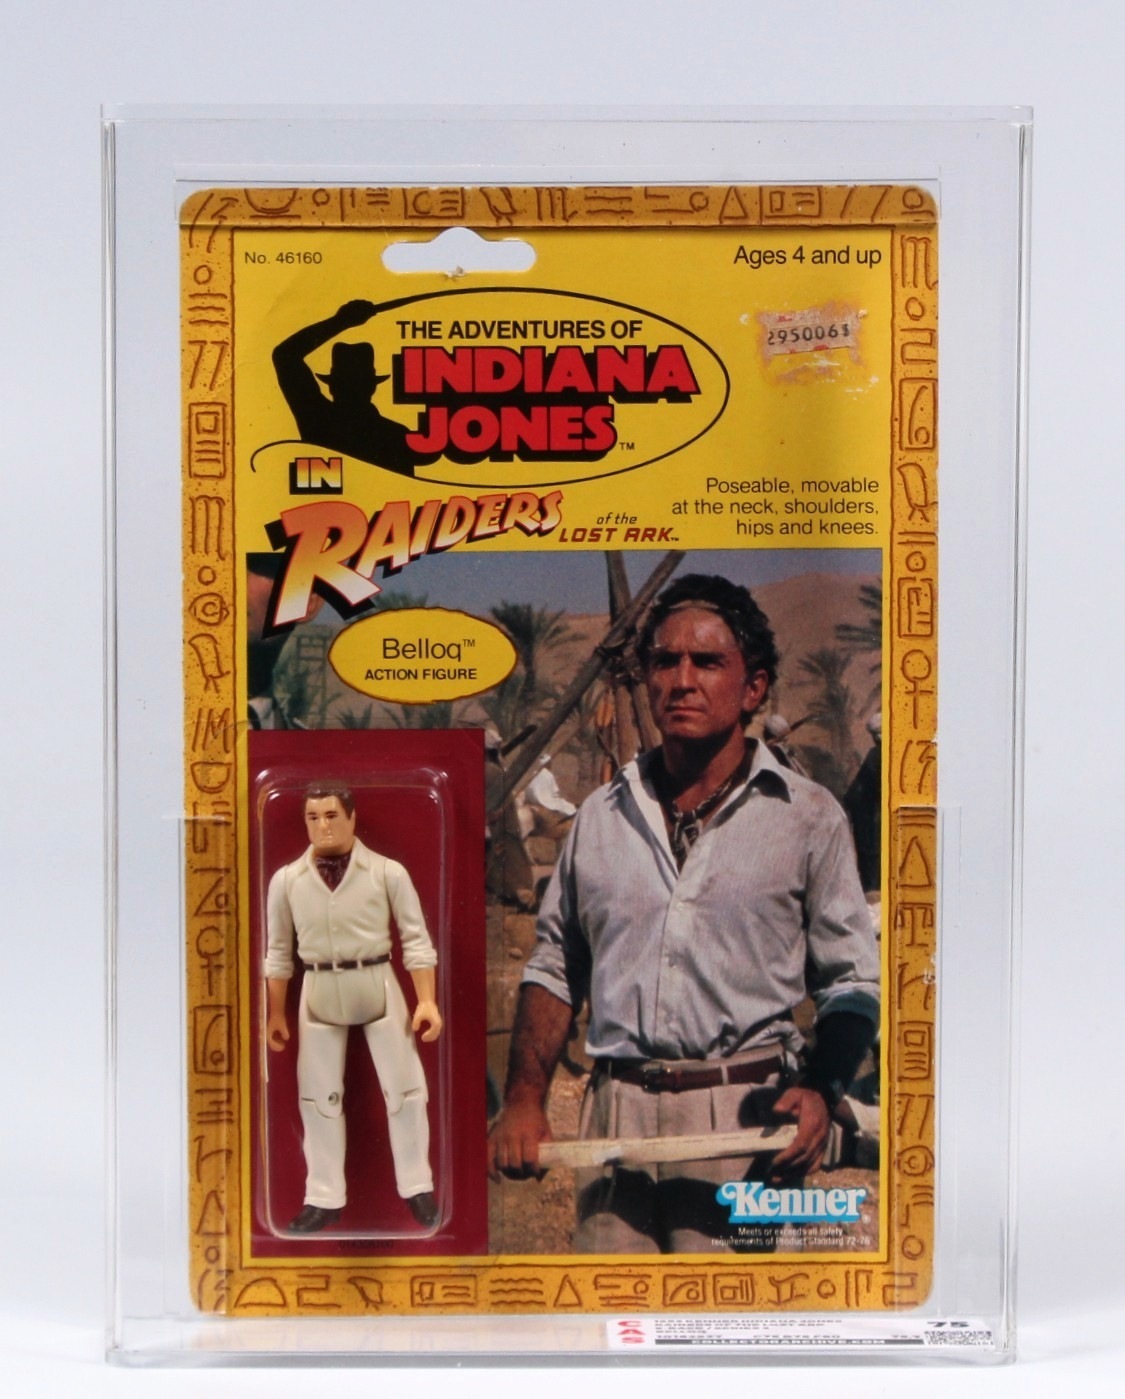 1982 Kenner Indiana Jones Carded Action Figure Belloq